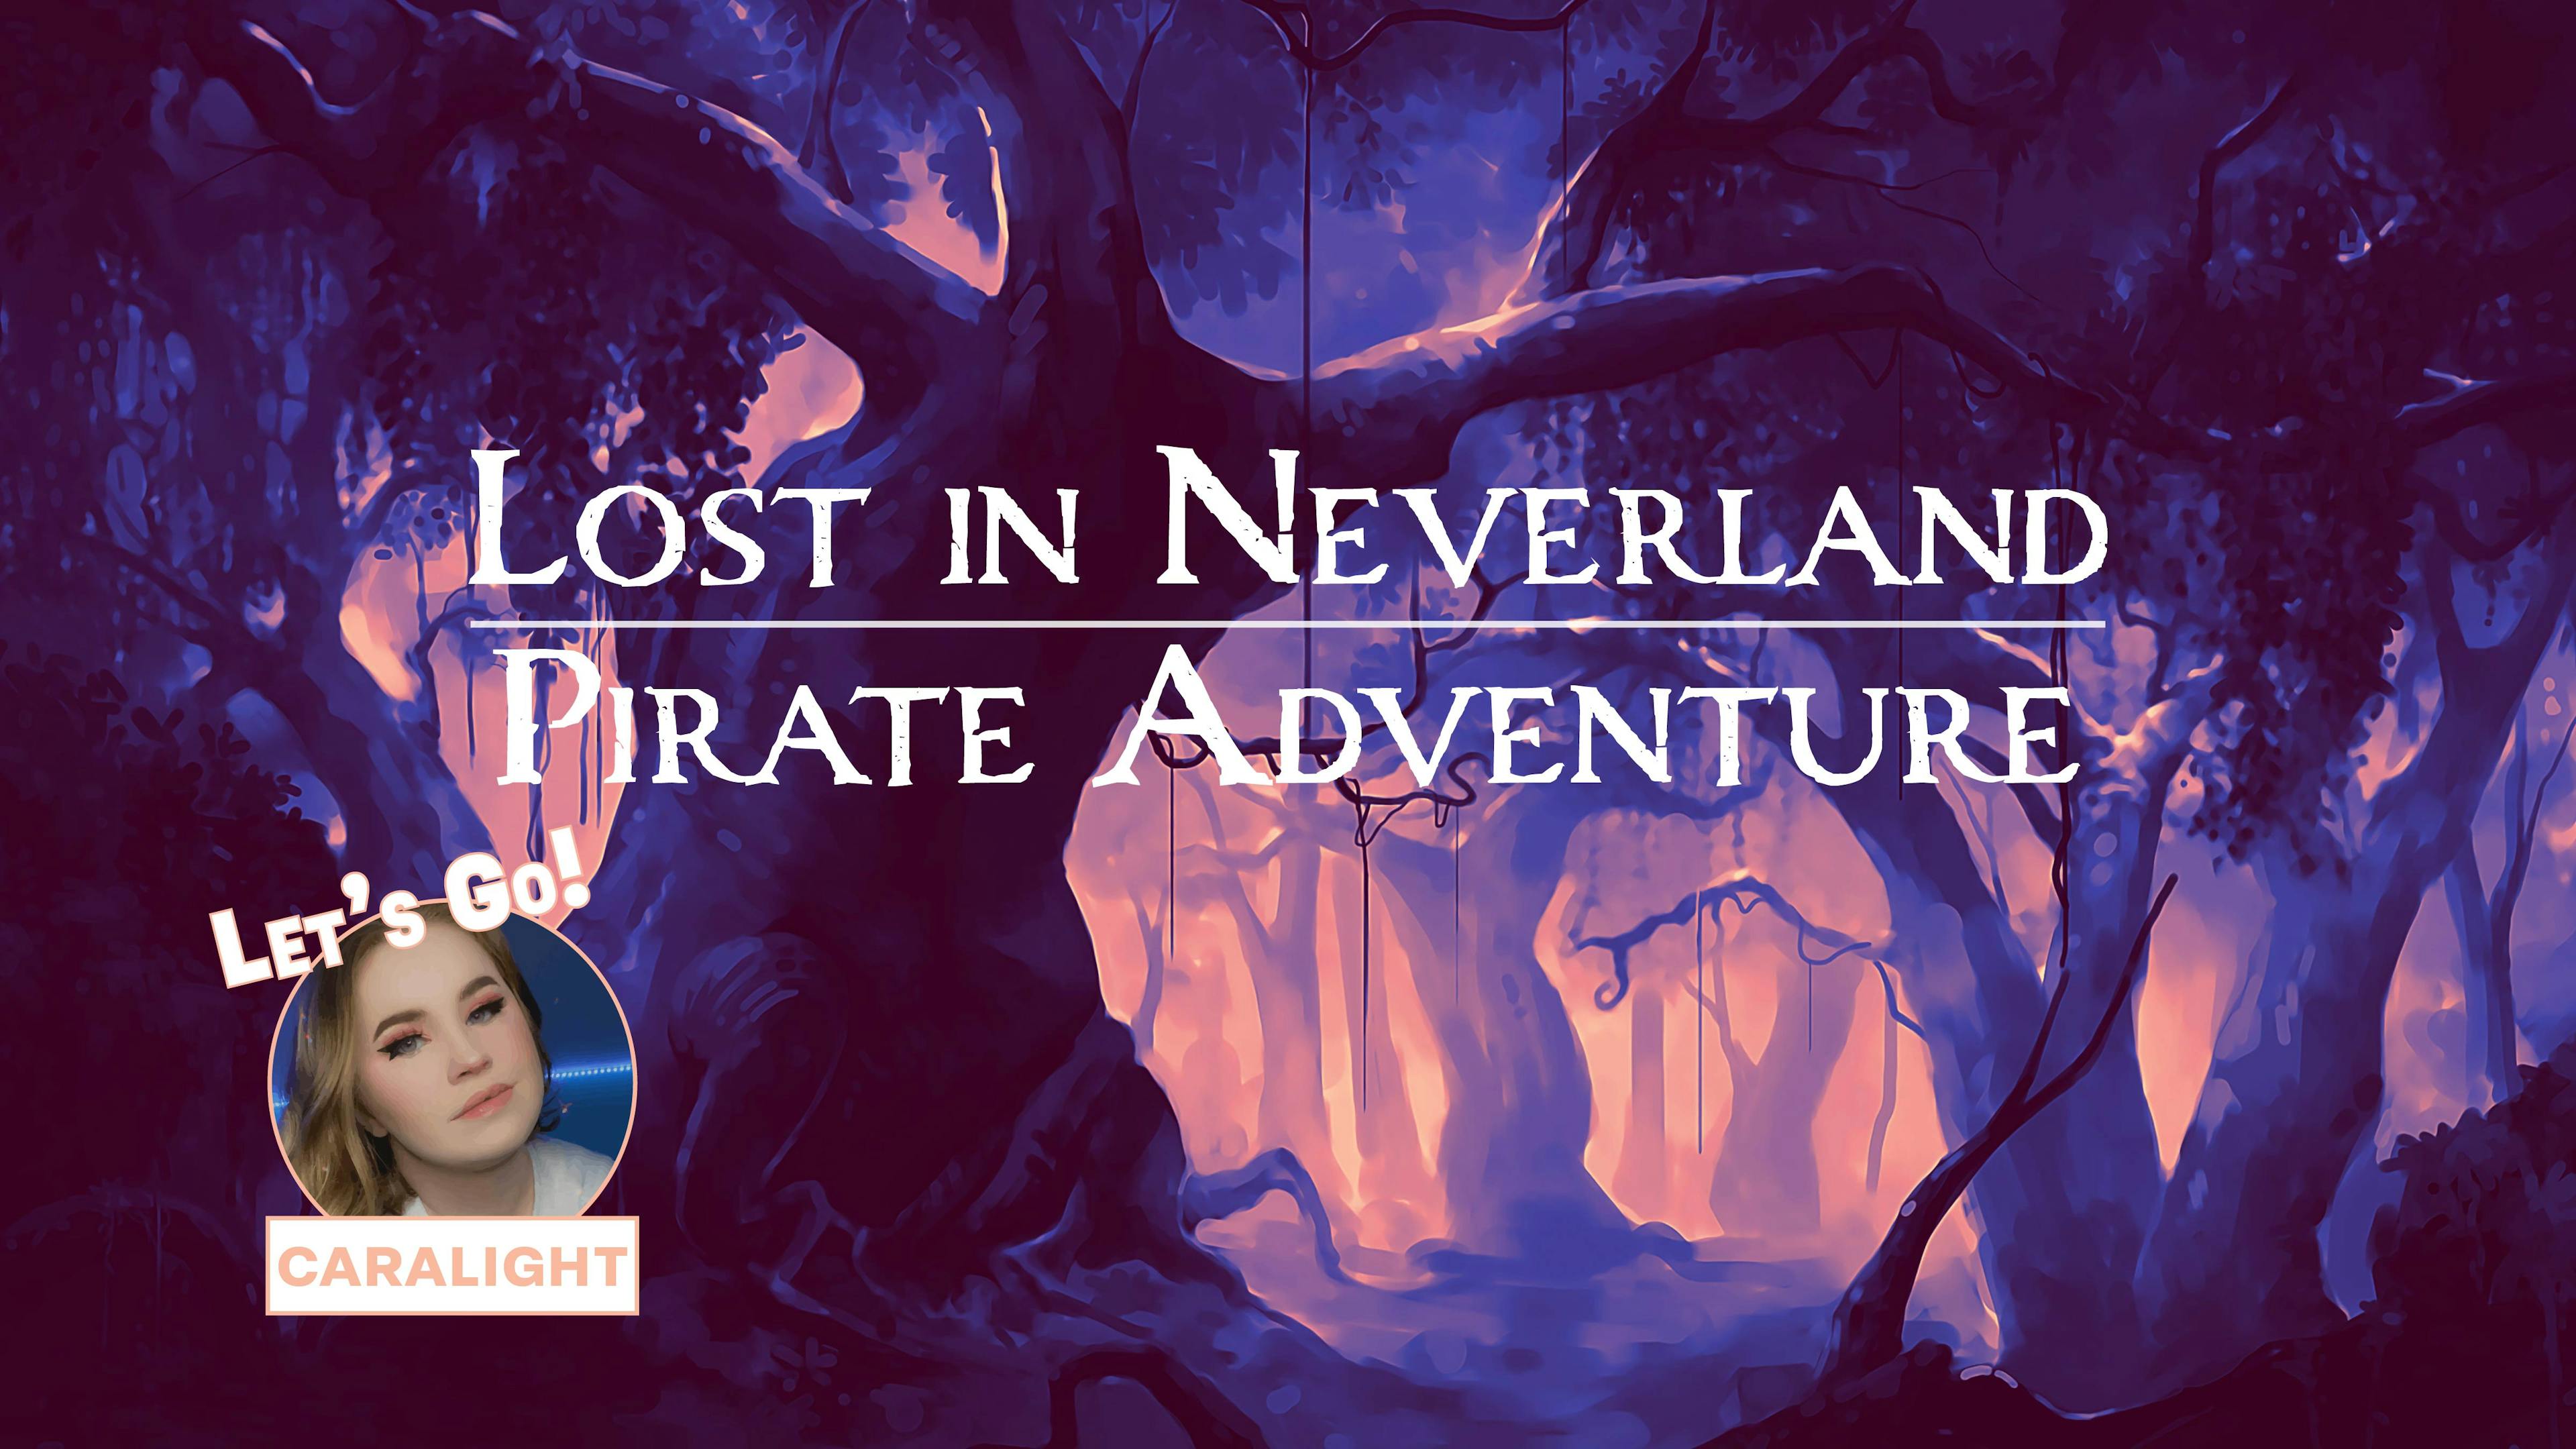 Lost in Neverland: Pirates, Mermaids, Fairies, and more!